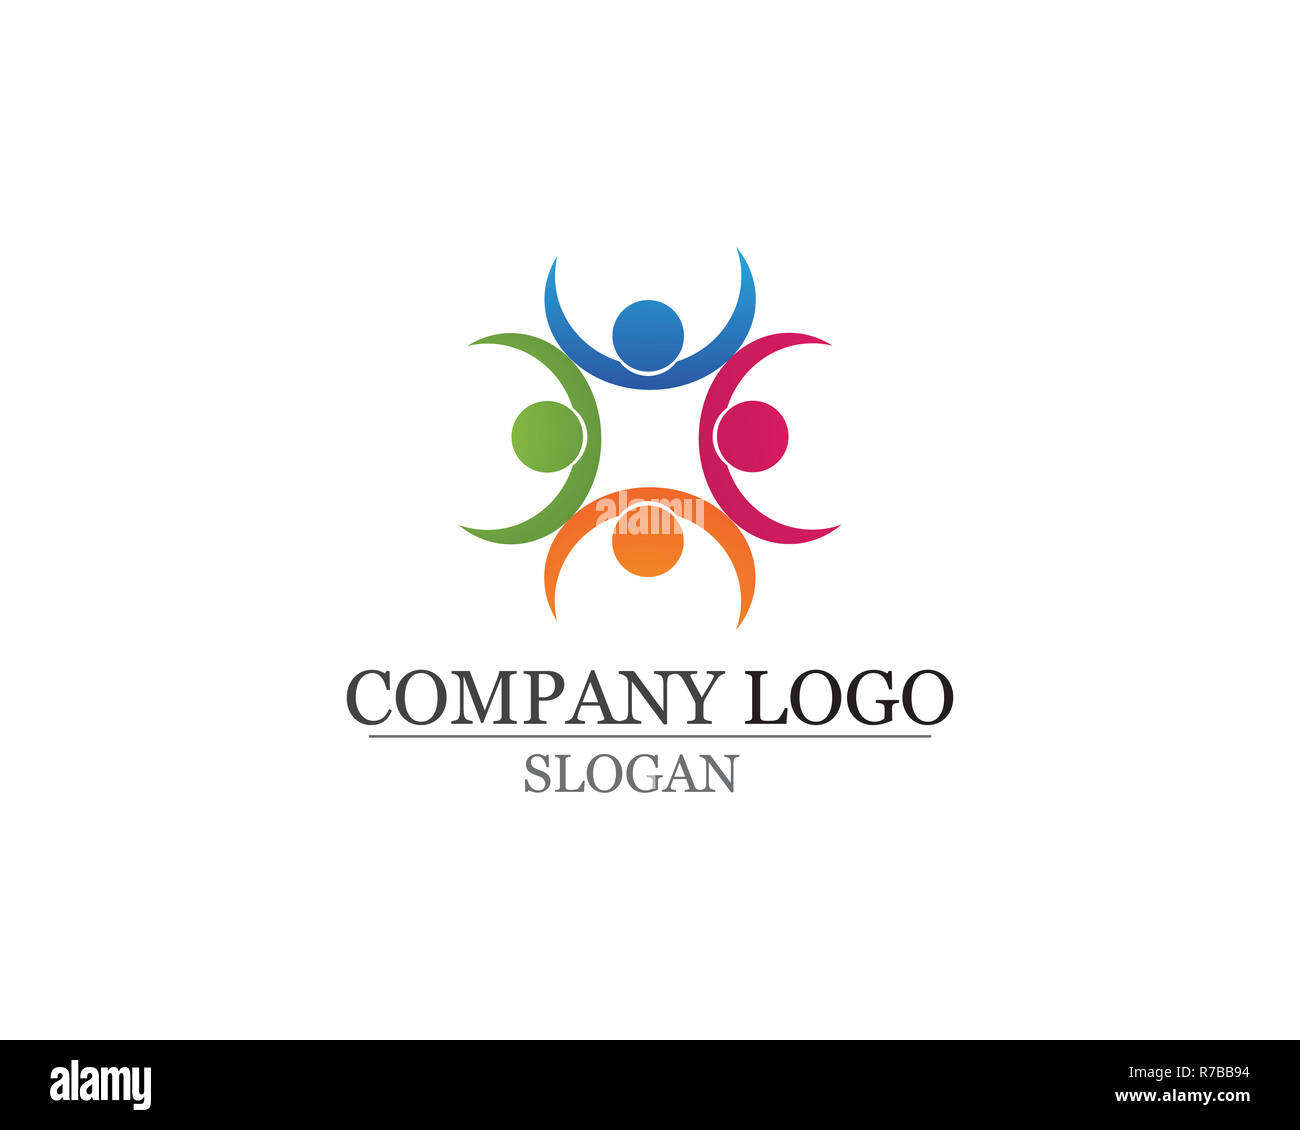 Community people care logo and symbols template Stock Photo